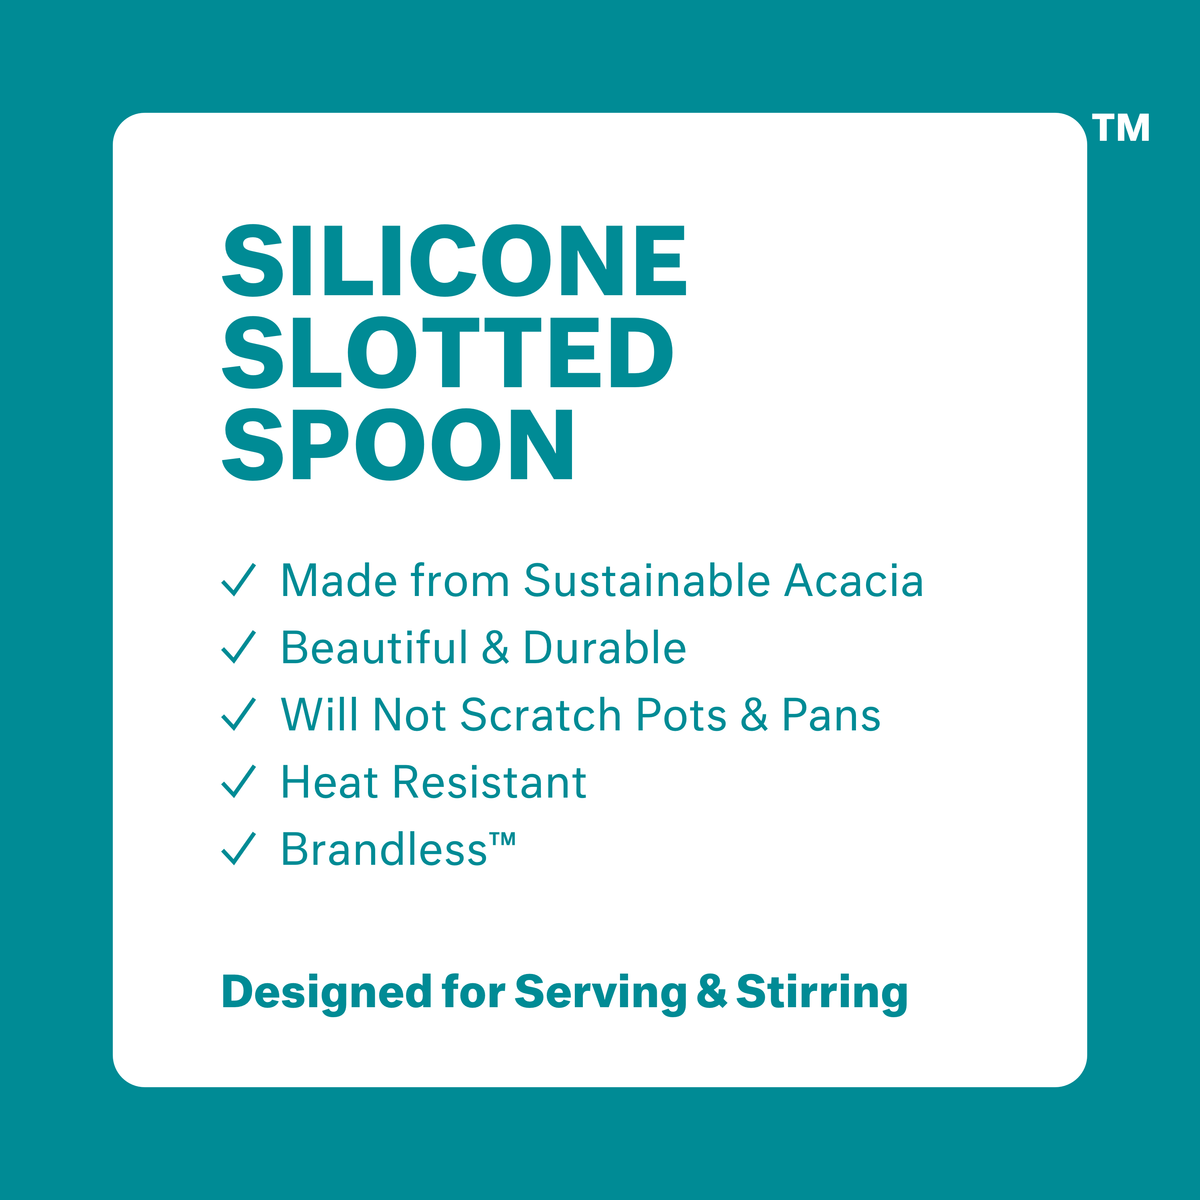 Silicone Slotted Spoon: made from sustainable acacia, beautiul &amp; durable, will not scratch pots &amp; pans, heat resistant, brandless. Designed for serving and stirring.